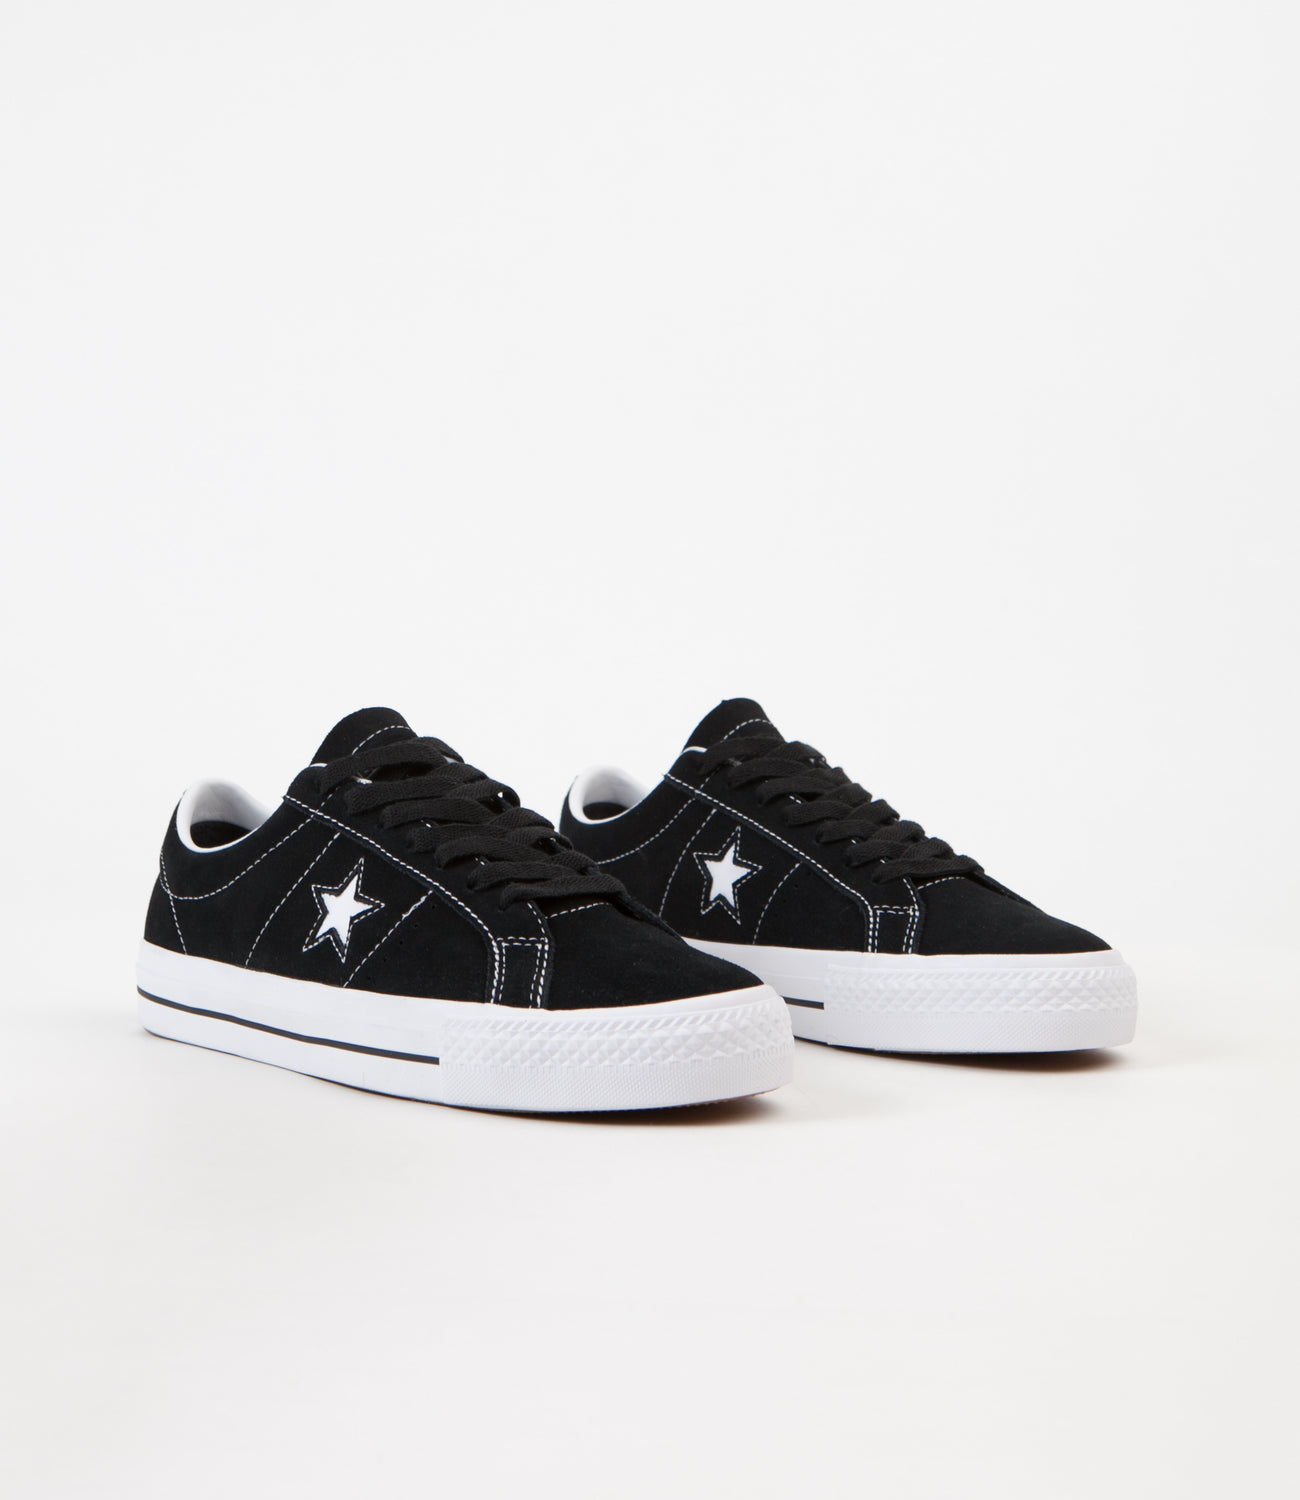 Converse One Star Pro Ox Shoes - Black 